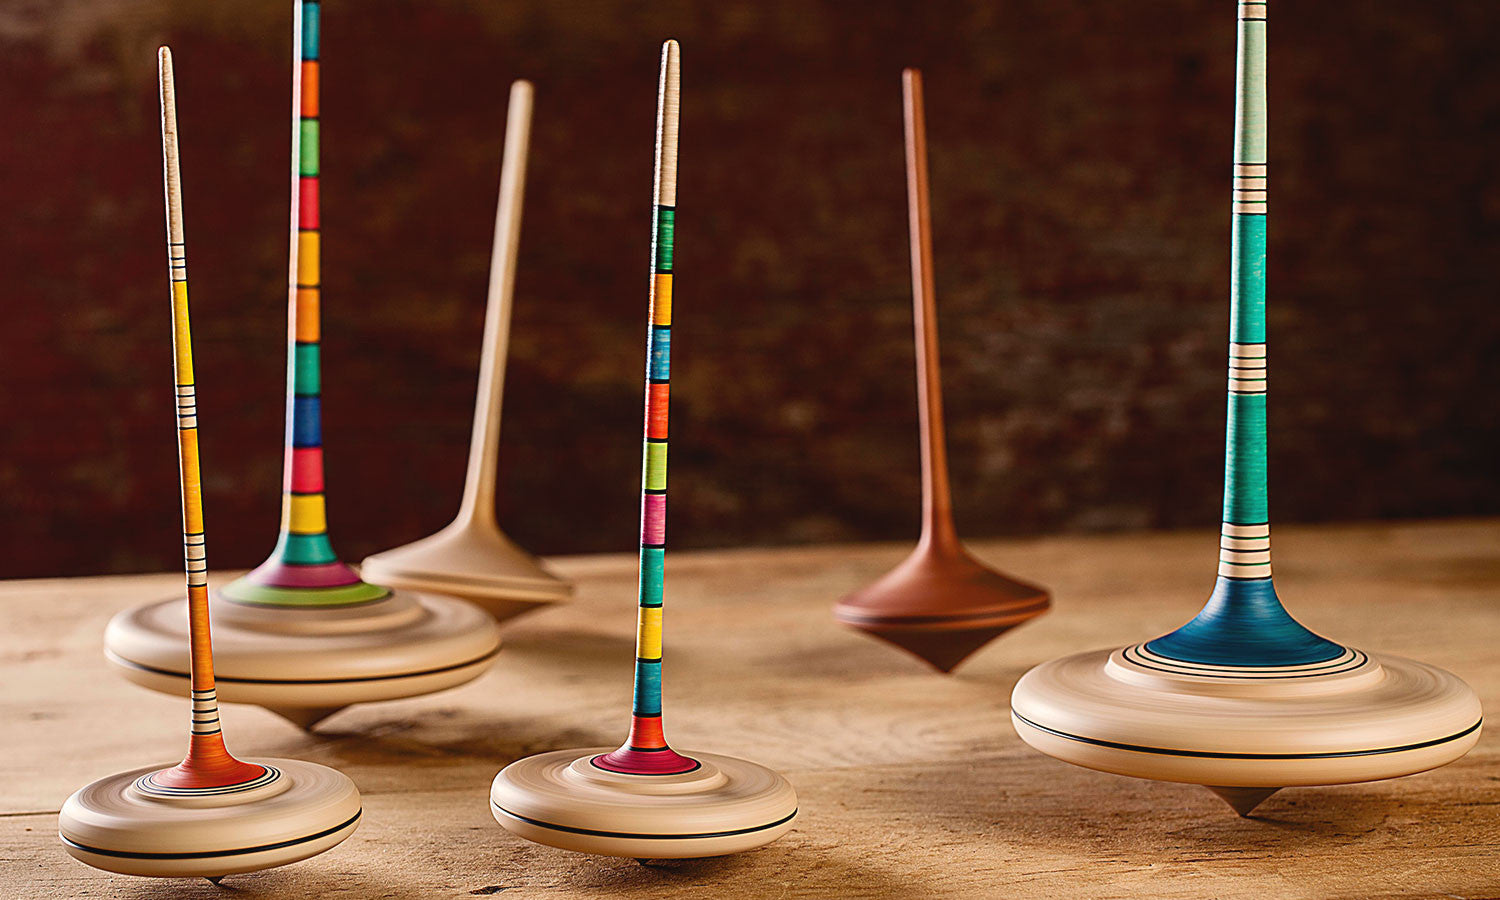 Spinning items. Spinning Top. Wooden Spinning Tops. Spinning Top trading. Spinning Top паттерн.